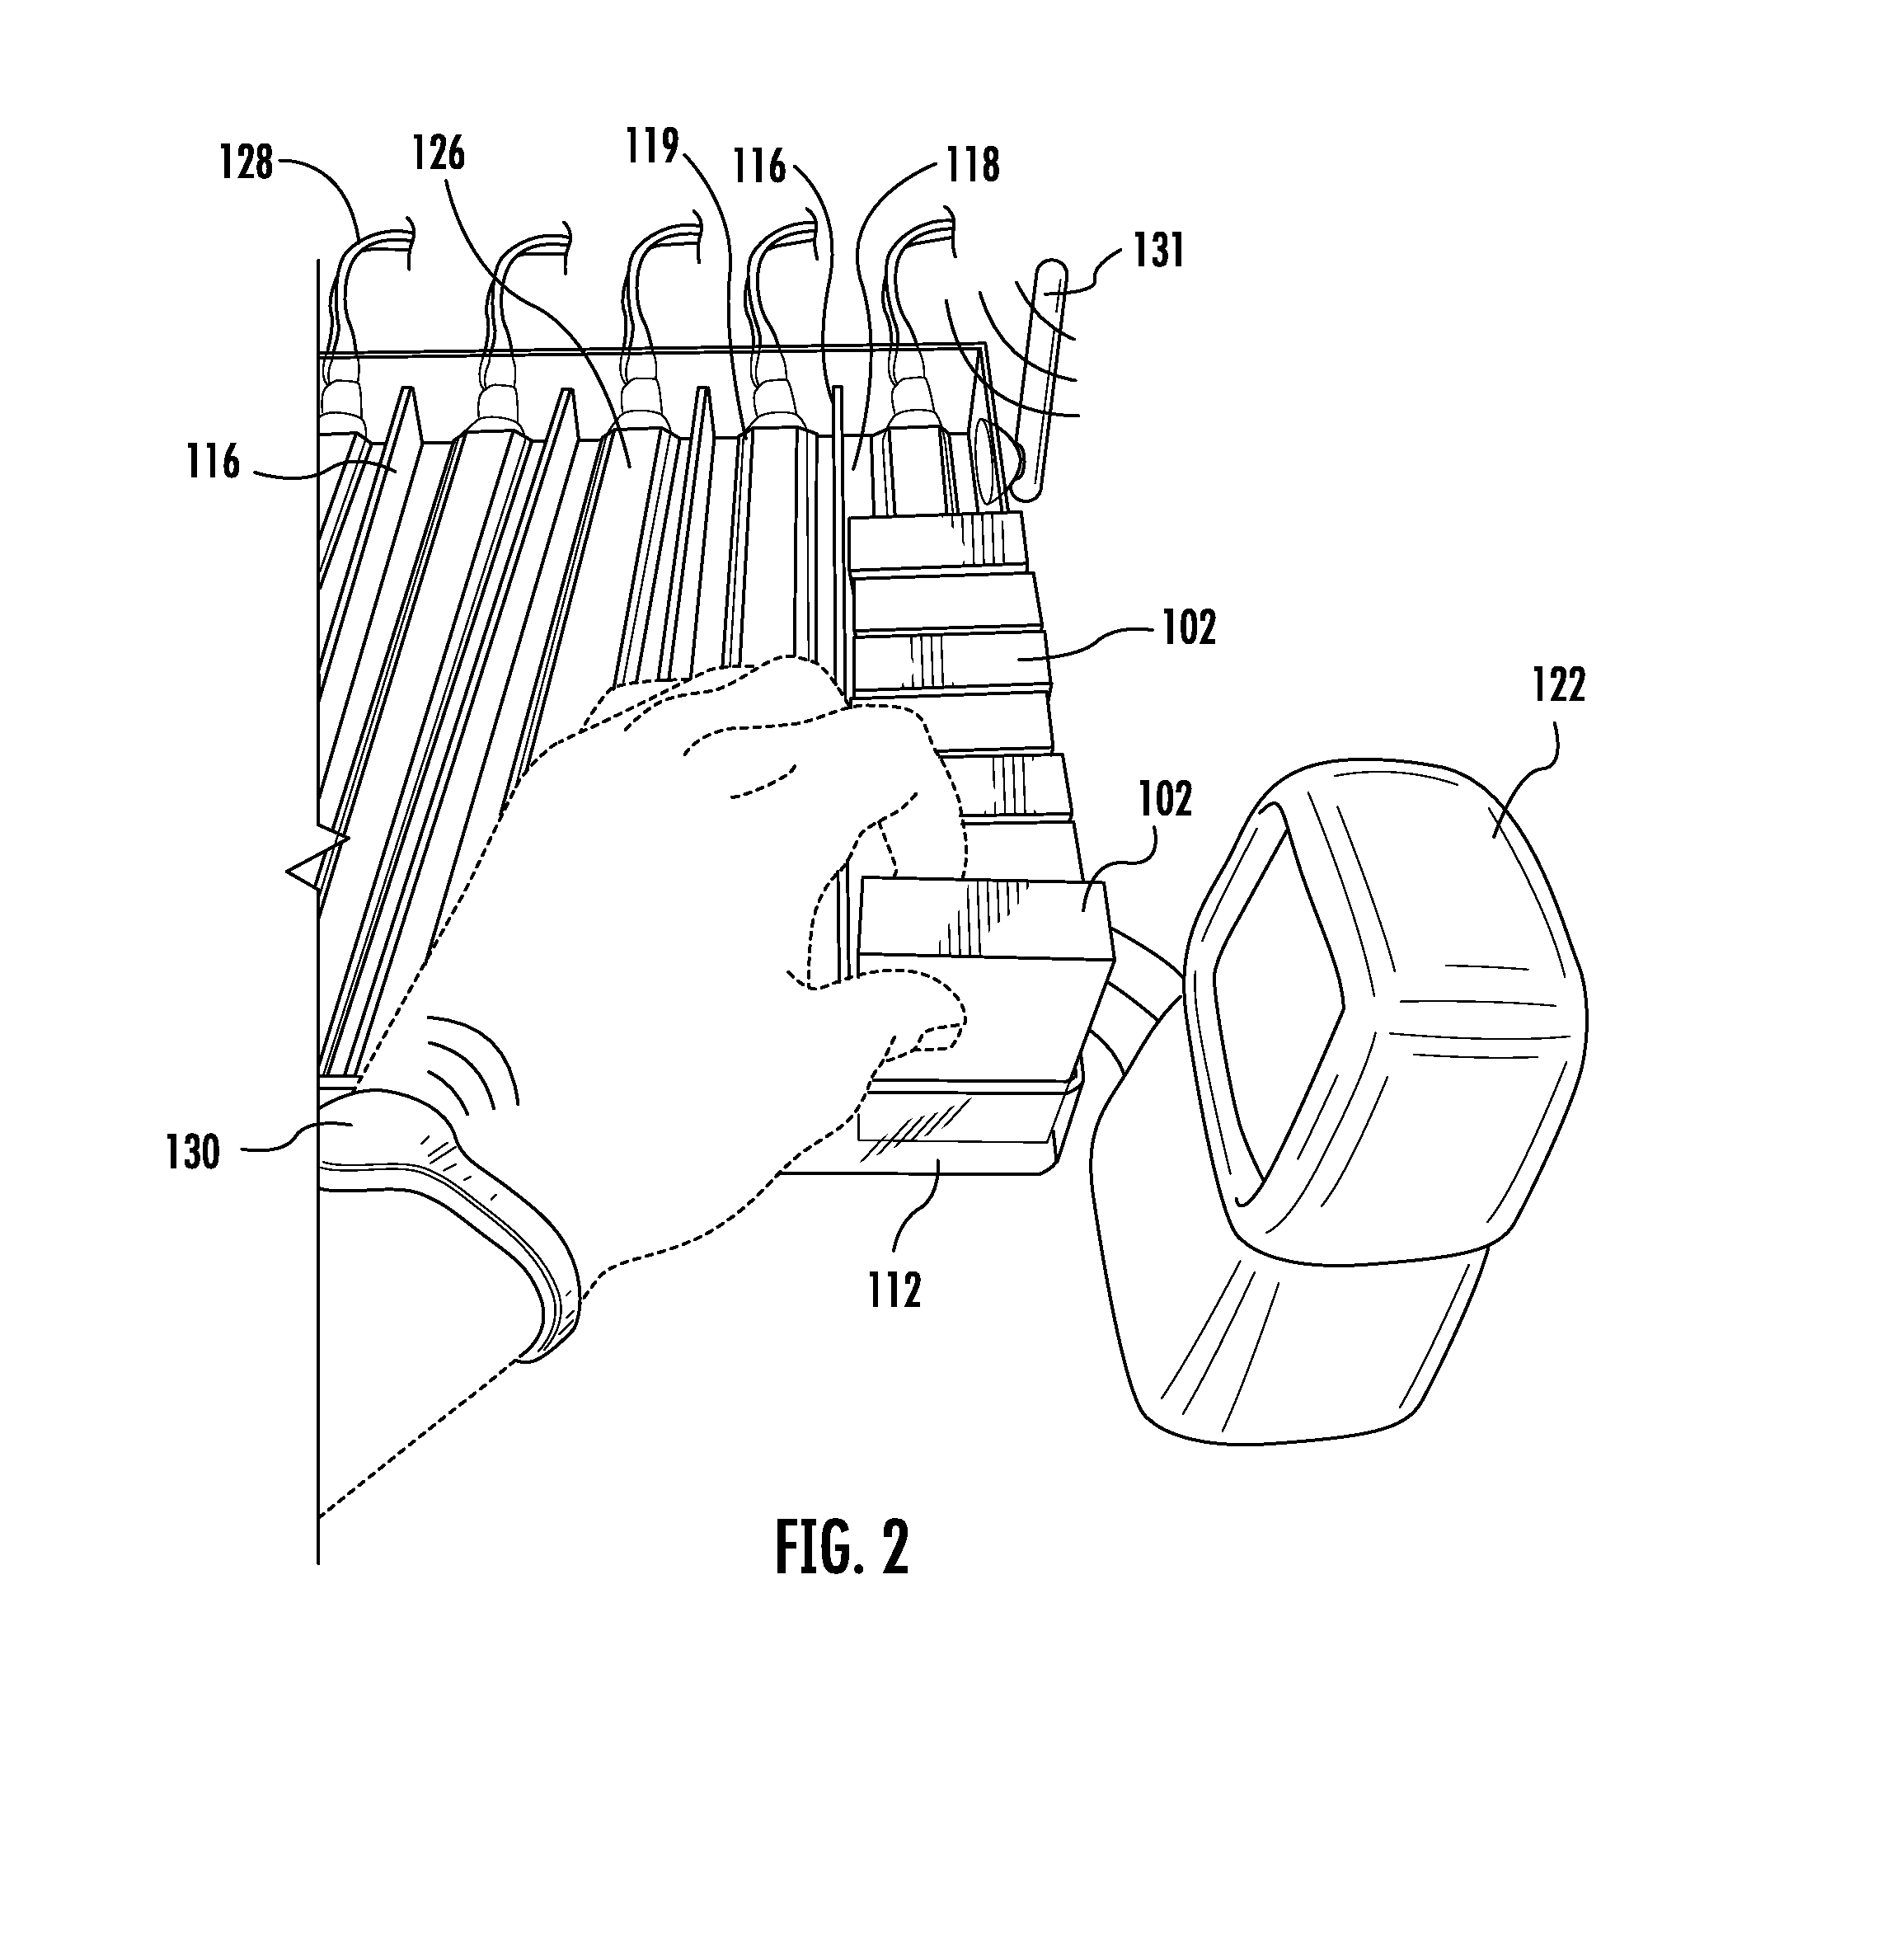 Inventory system for the prevention of tobacco product theft